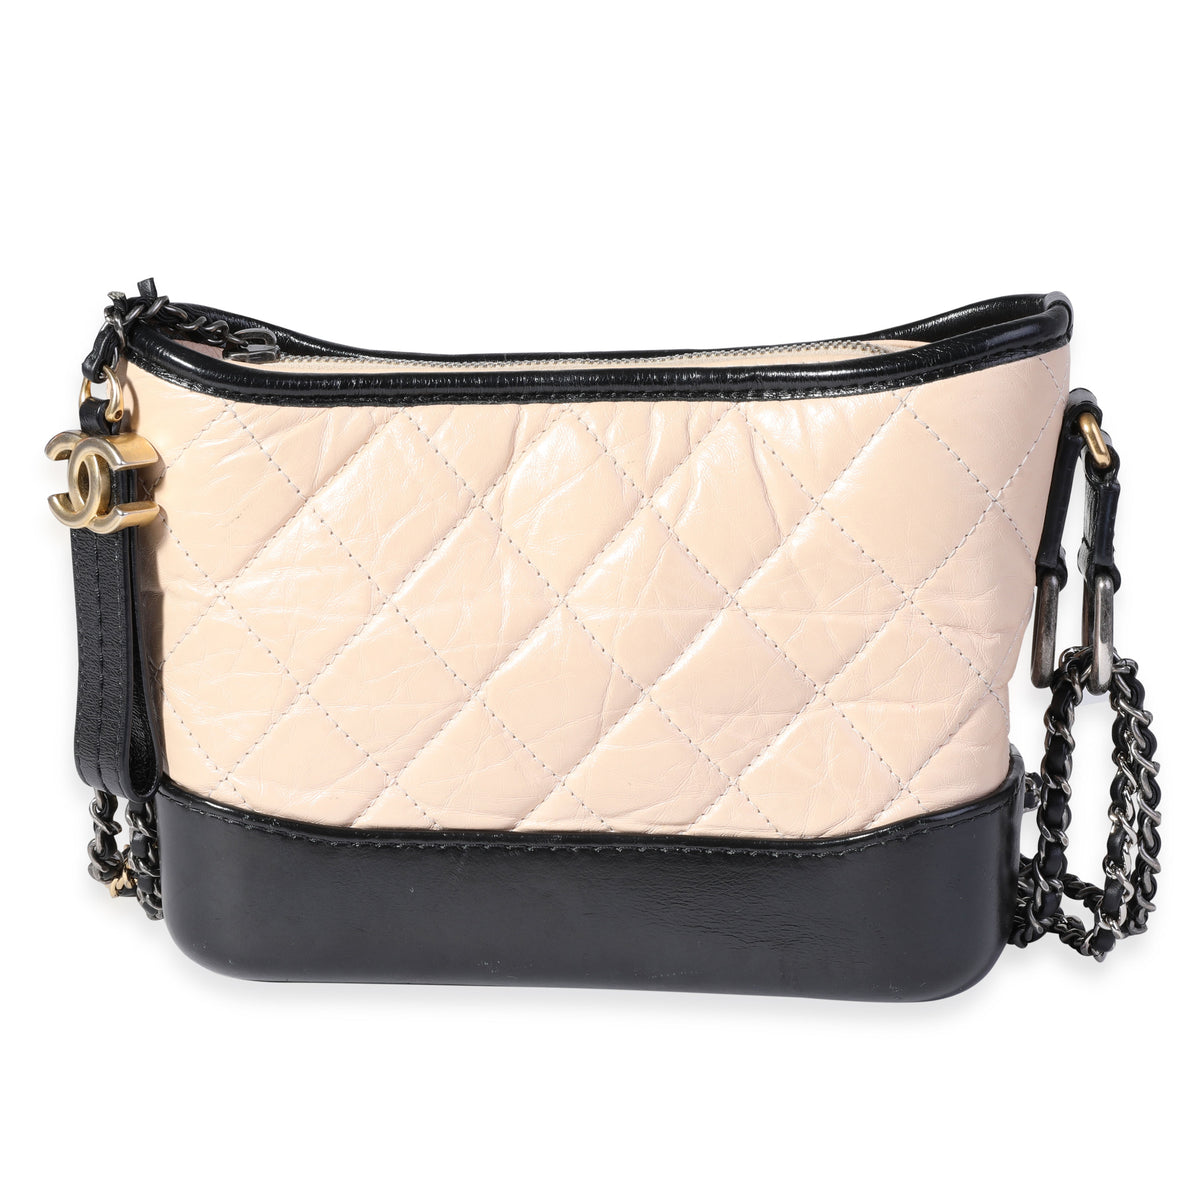 Chanel Beige & Black Quilted Aged Calfskin Small Gabrielle Hobo